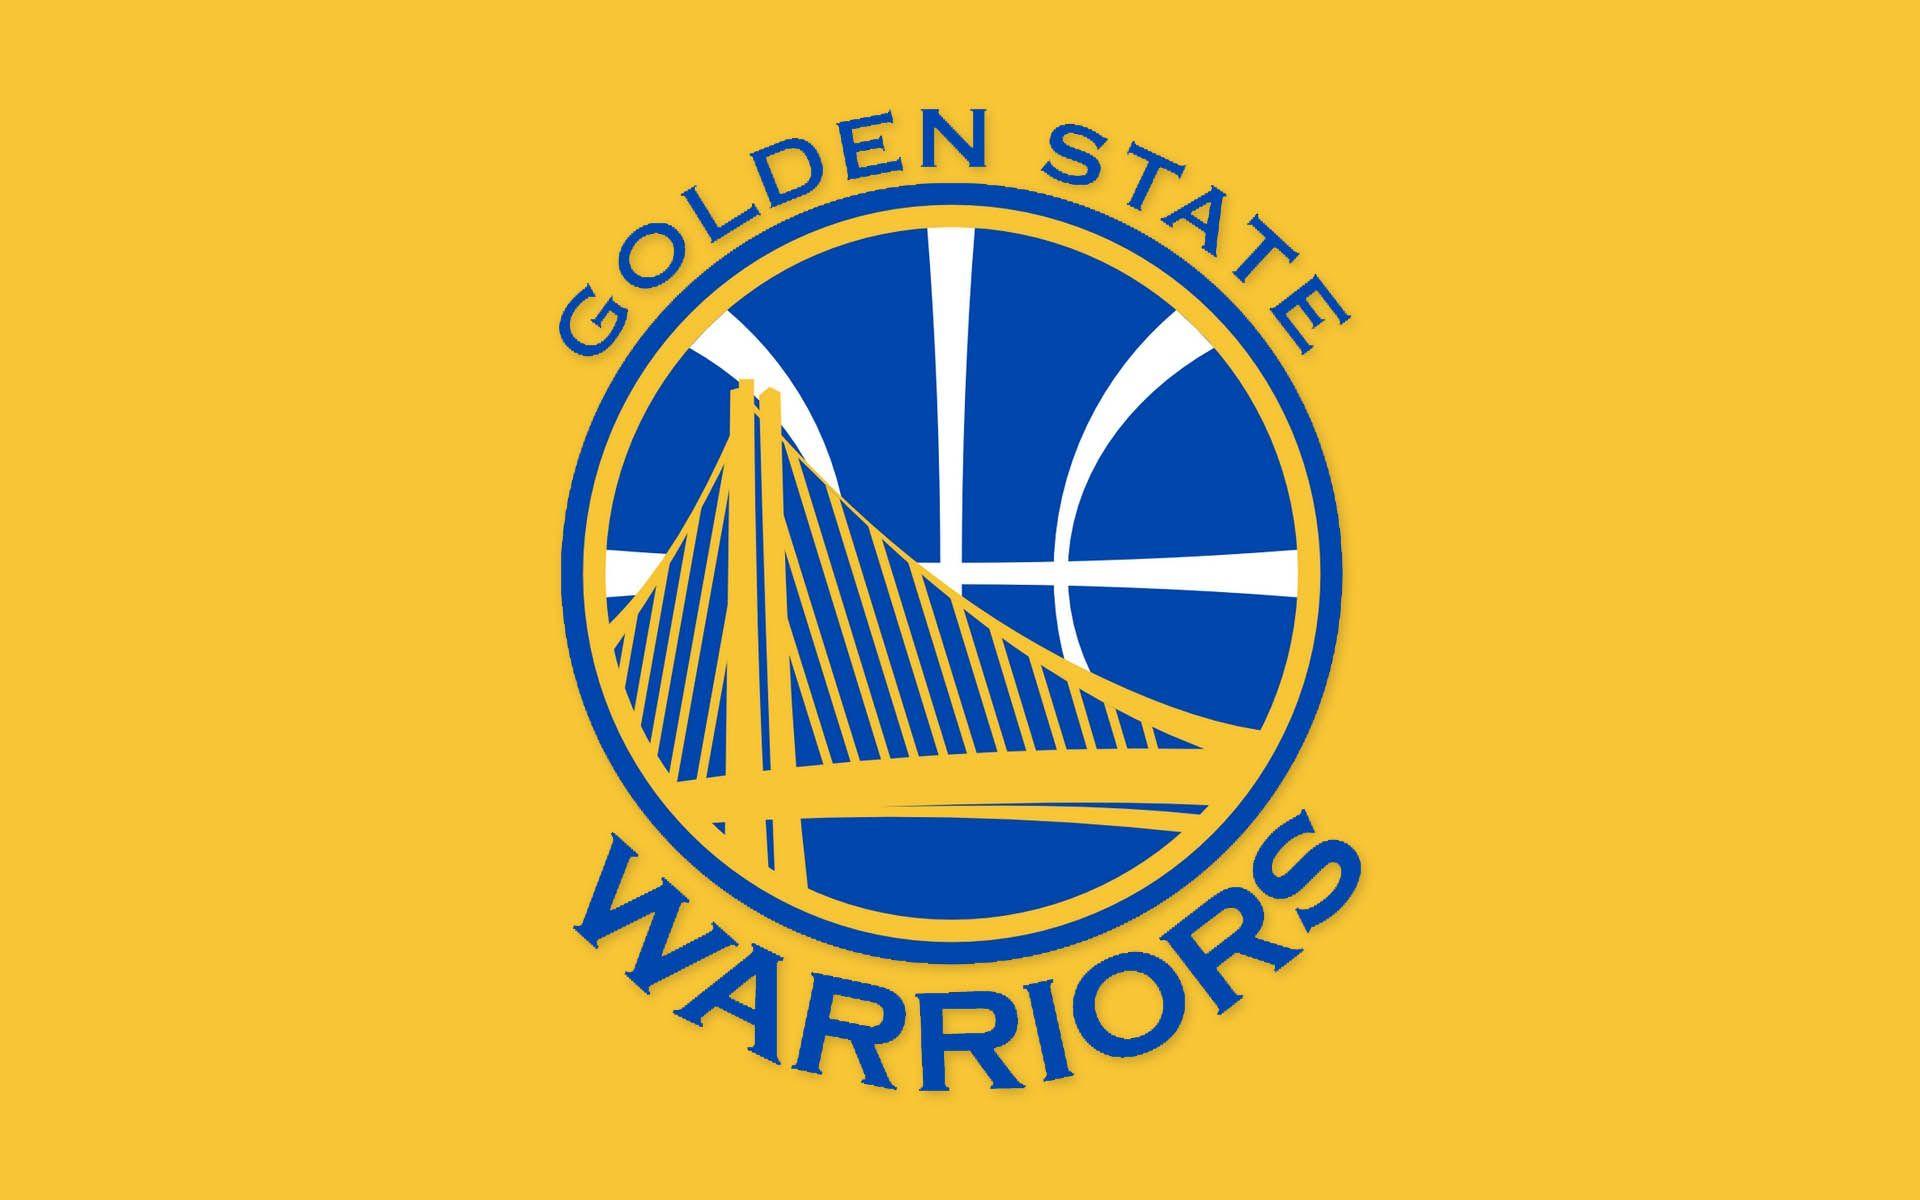 Stephen Curry Logo Wallpapers - Wallpaper Cave